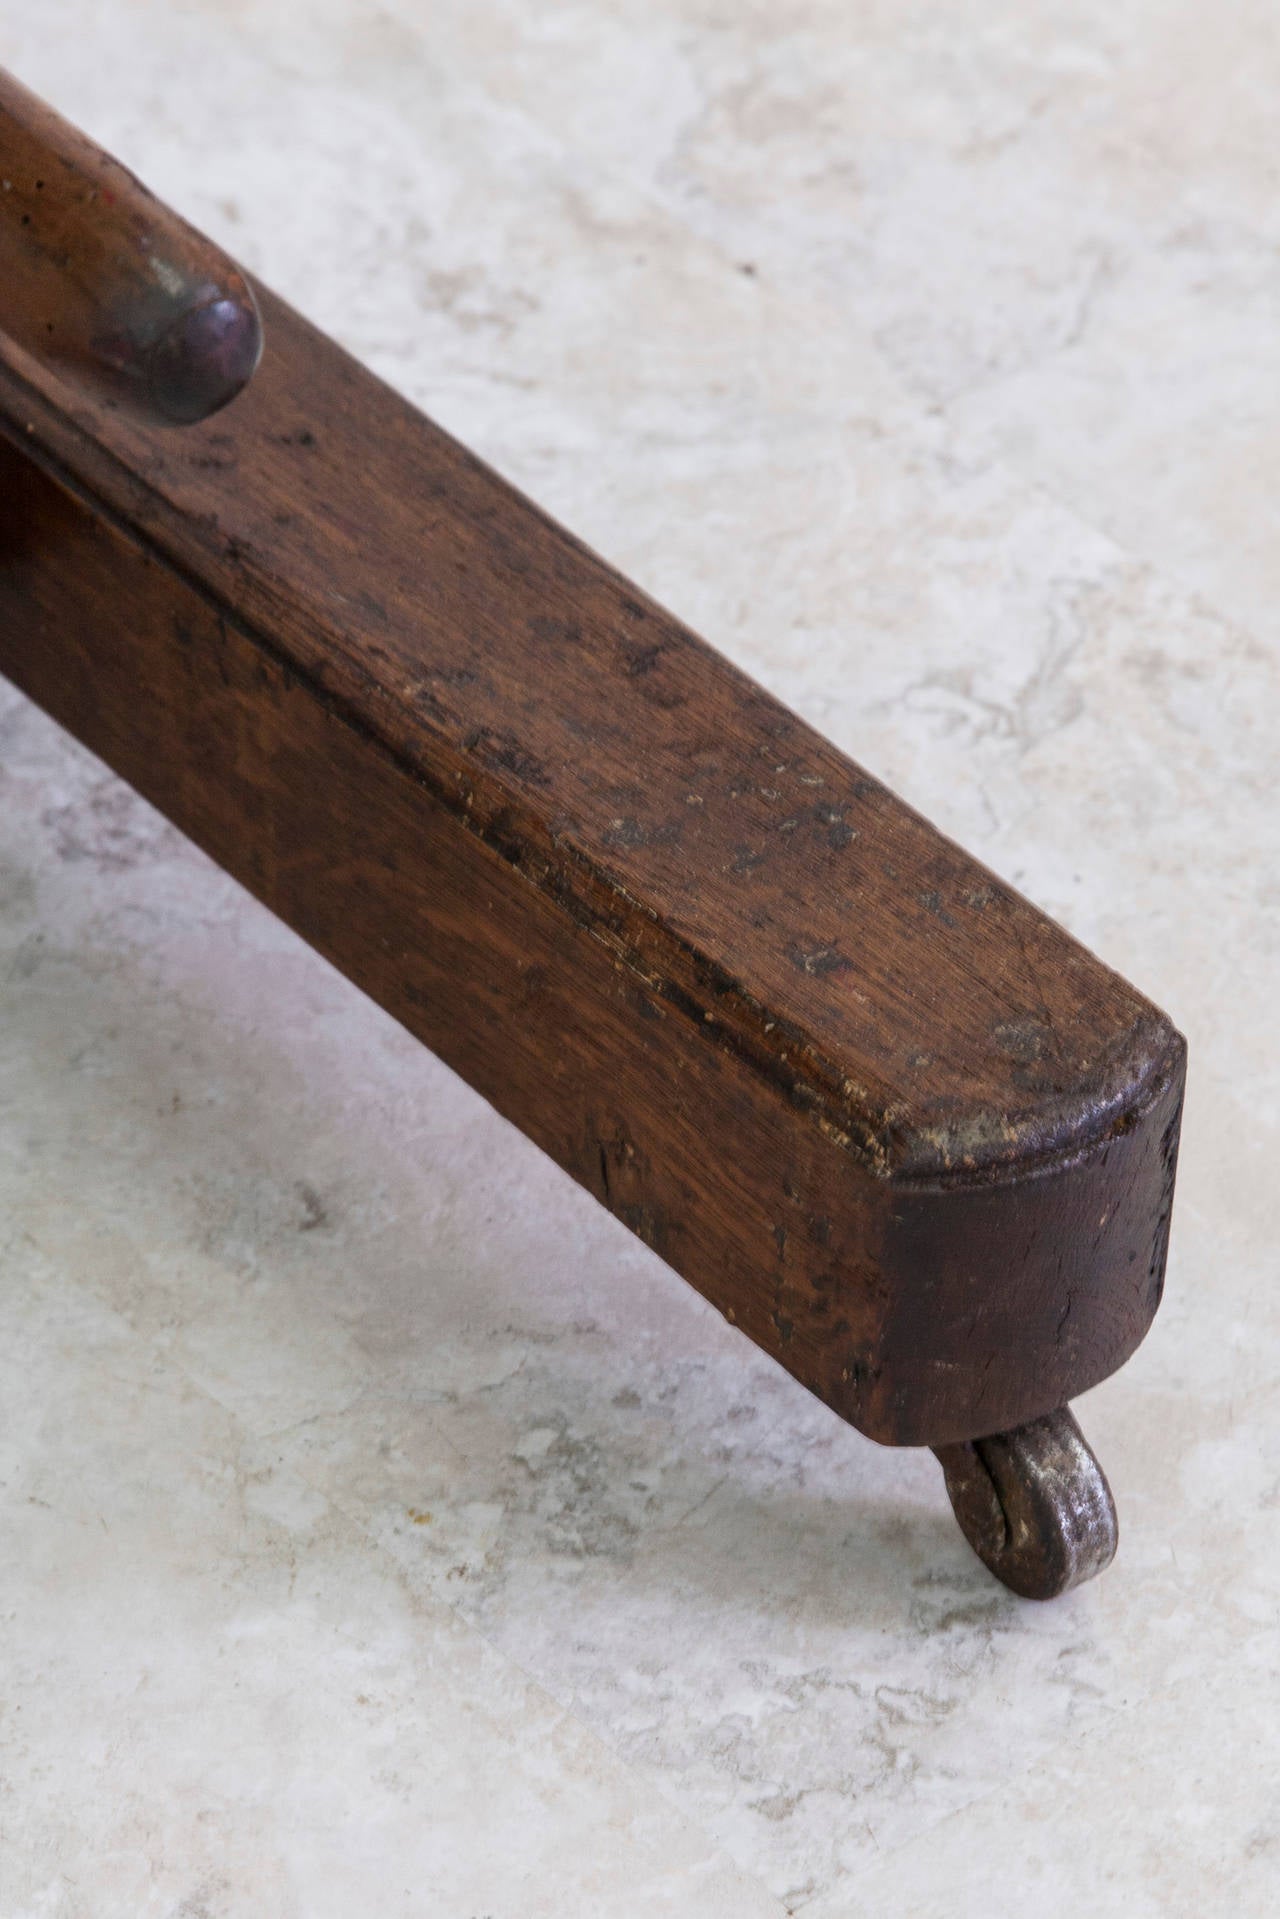 This late 19th century oak artist's easel has its original functioning crank mechanism to adjust the tray height.  With a clever extendable notched catch at the top for multiples or deep edge canvases, this easel can handle impressively large